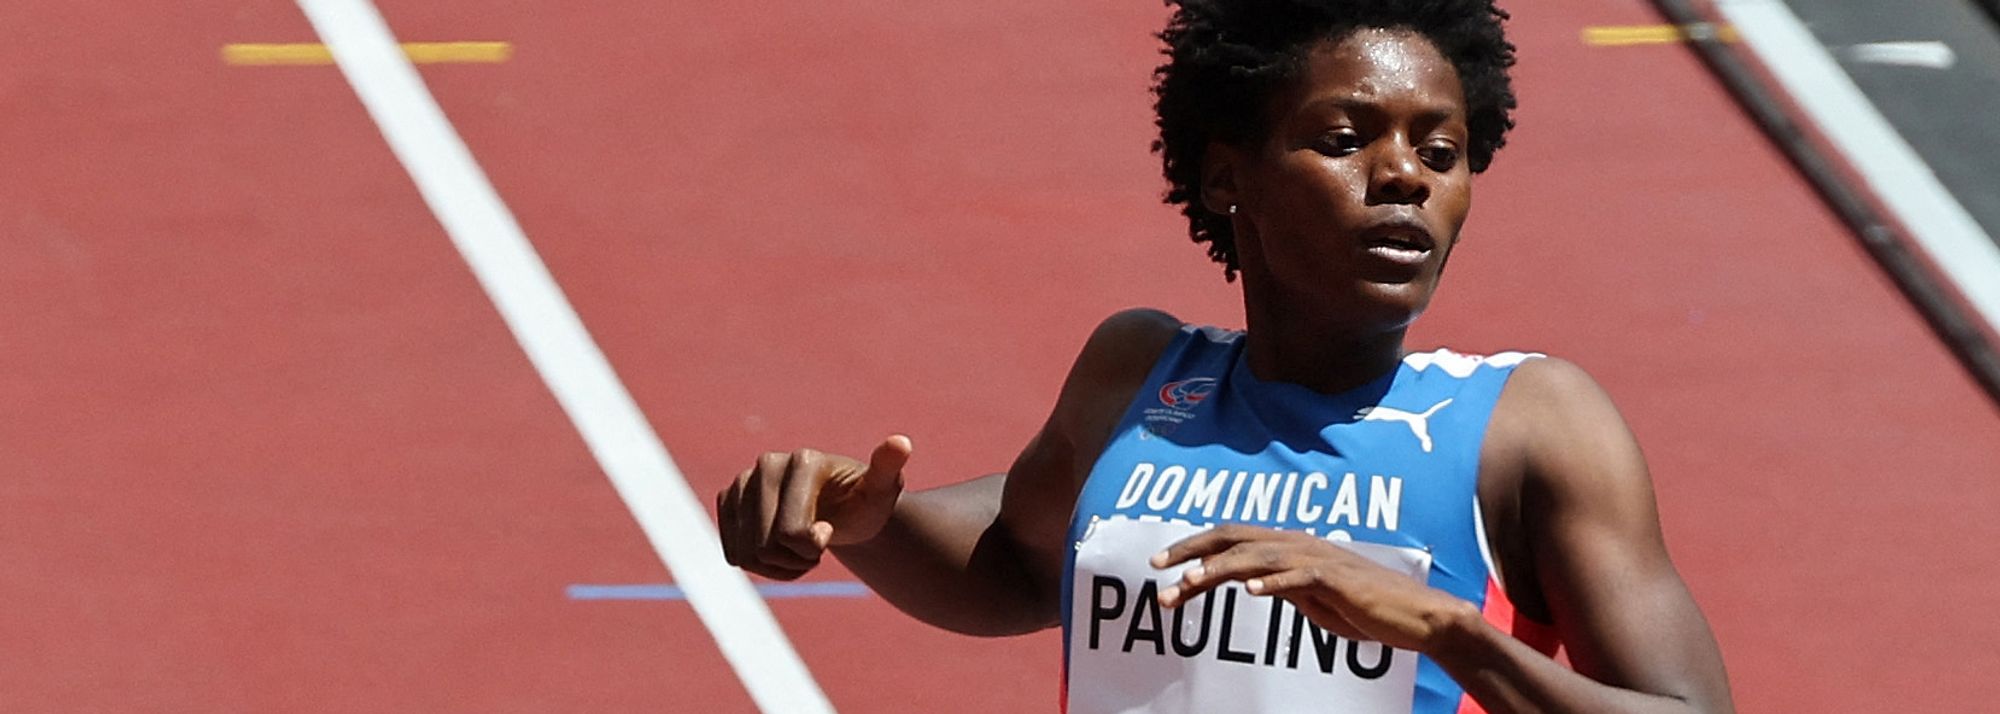 The remarkable rise of the one-lap sprinter from the Dominican Republic